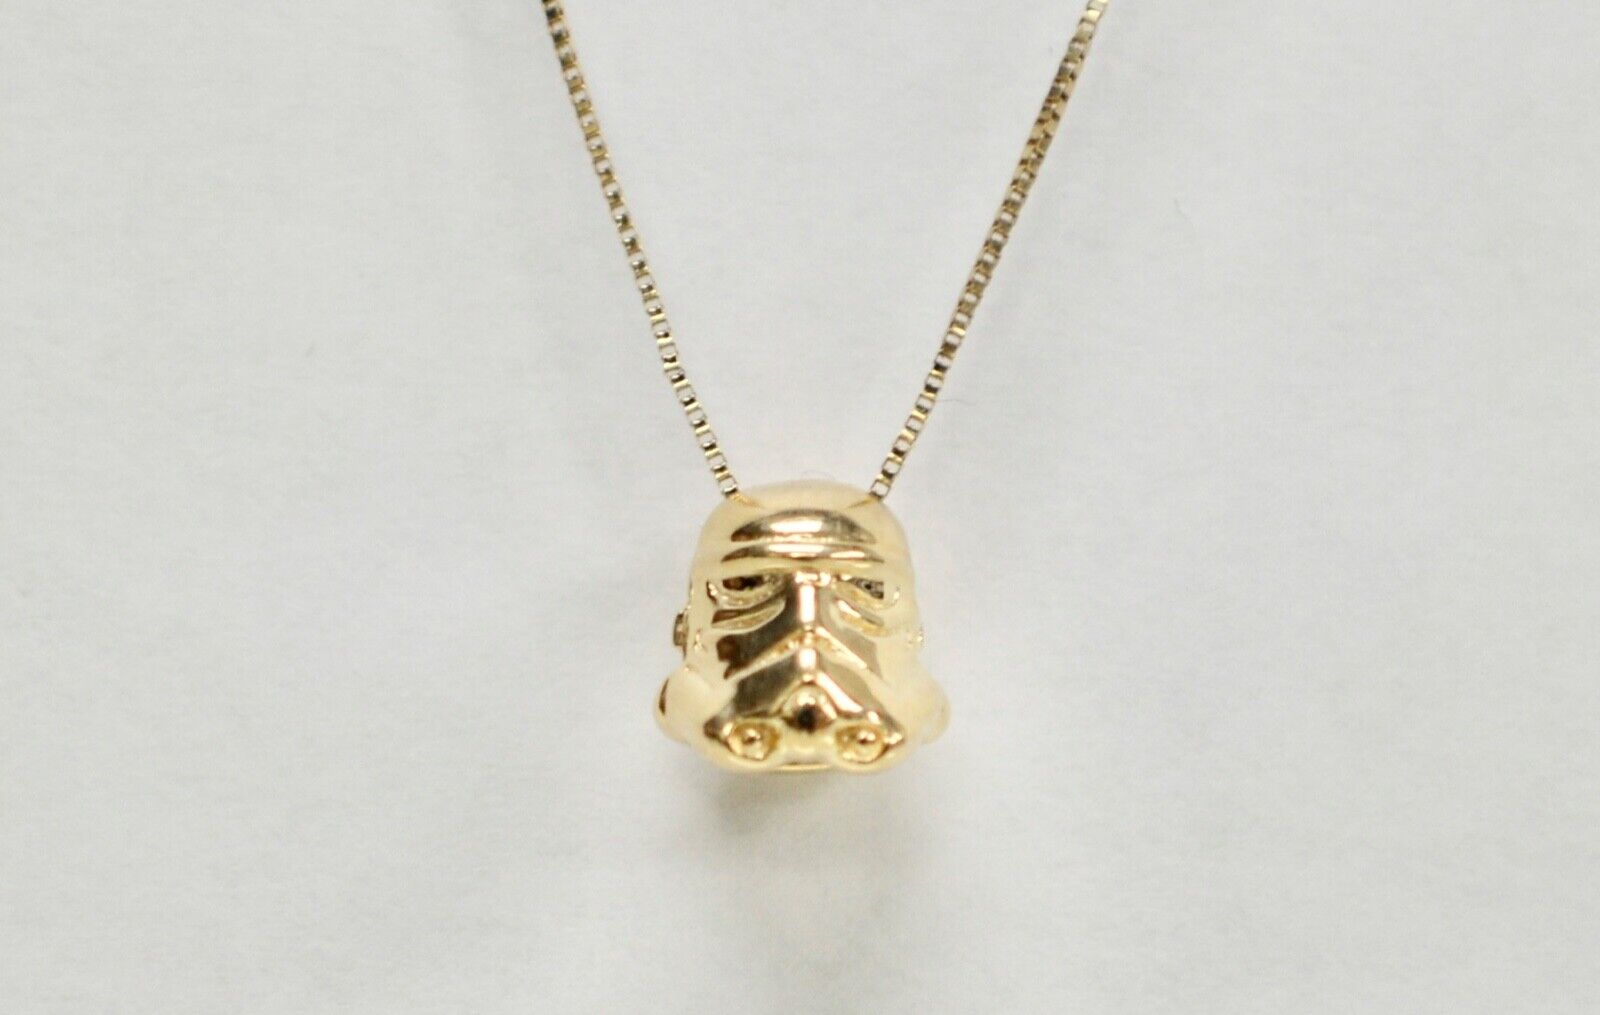 Star Wars Stormtrooper Necklace and Pendant 10k Yellow Gold Kay Jewelers